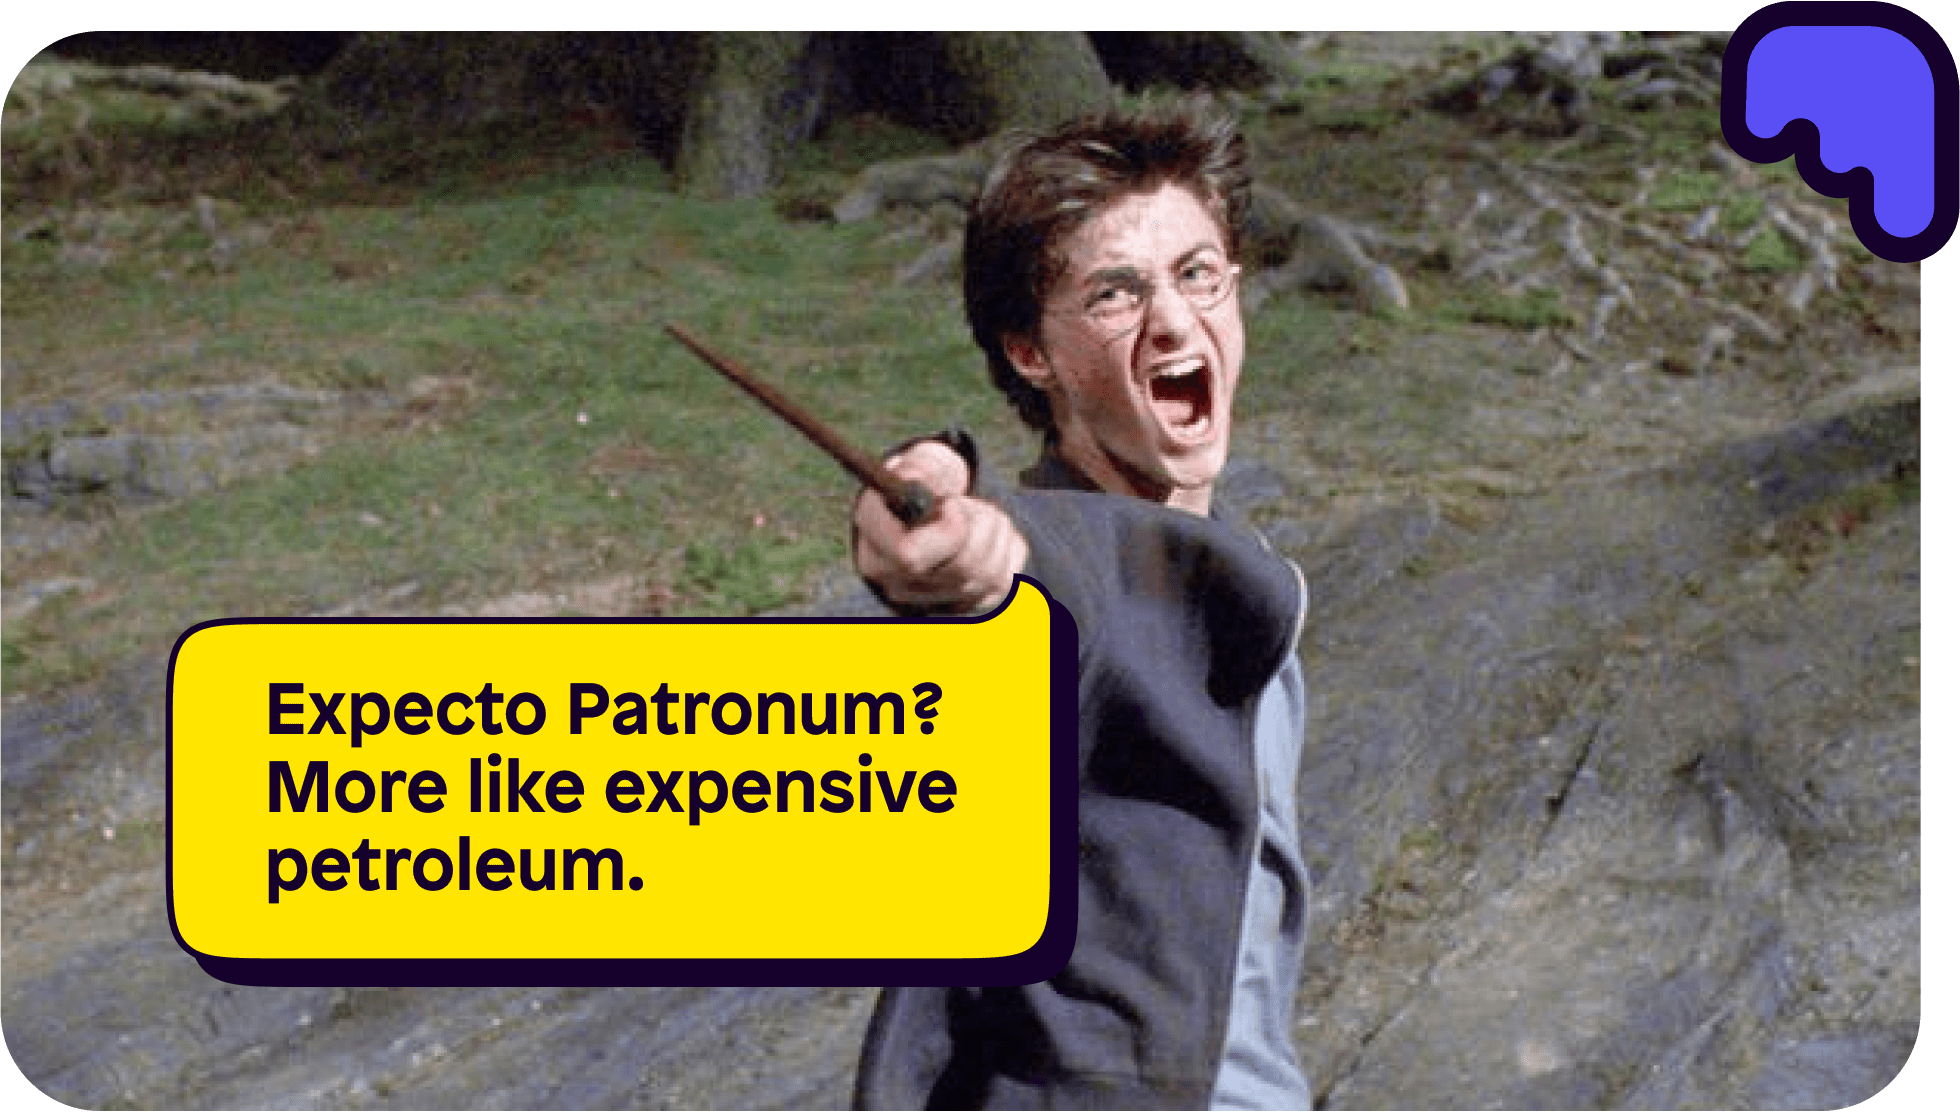 Harry Potter casting the Expecto Patronum spell, but expensive petroleum instead.